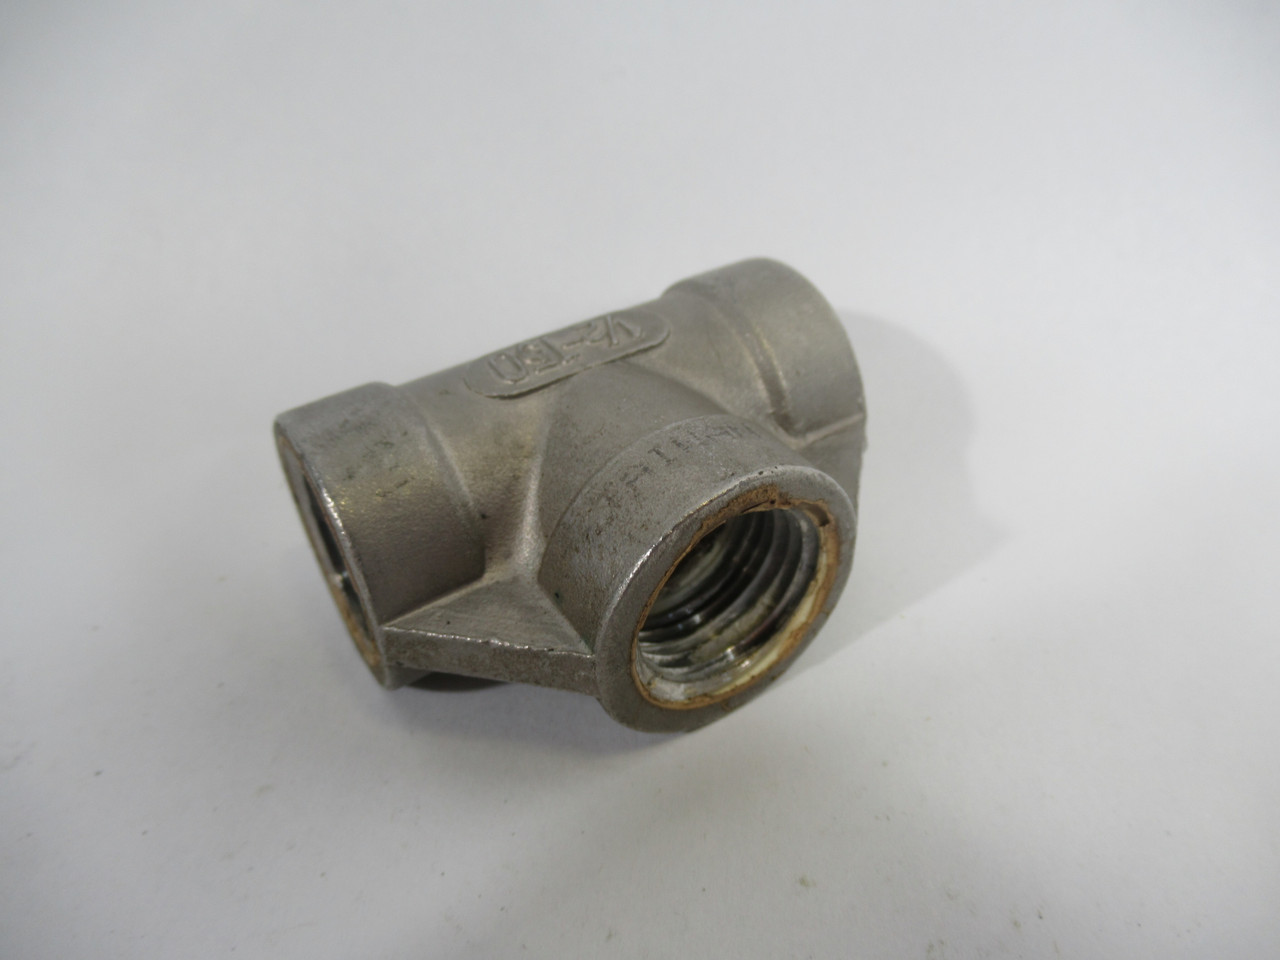 Generic YIH-316 T-Threaded Pipe Fitting 1/2-150 NPT USED